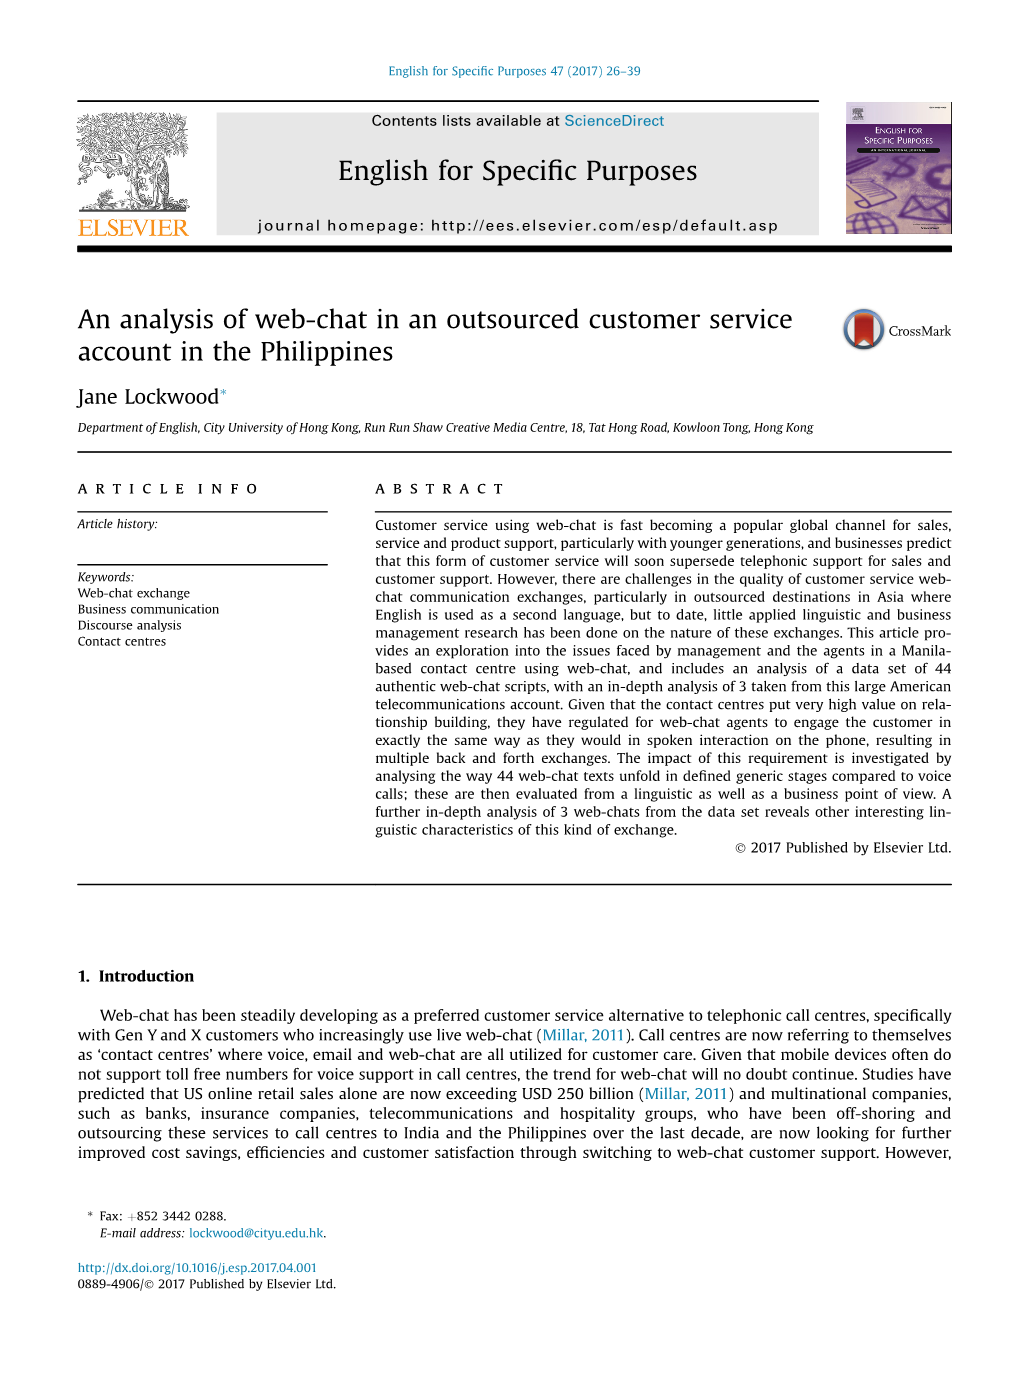 An Analysis of Web-Chat in an Outsourced Customer Service Account in the Philippines